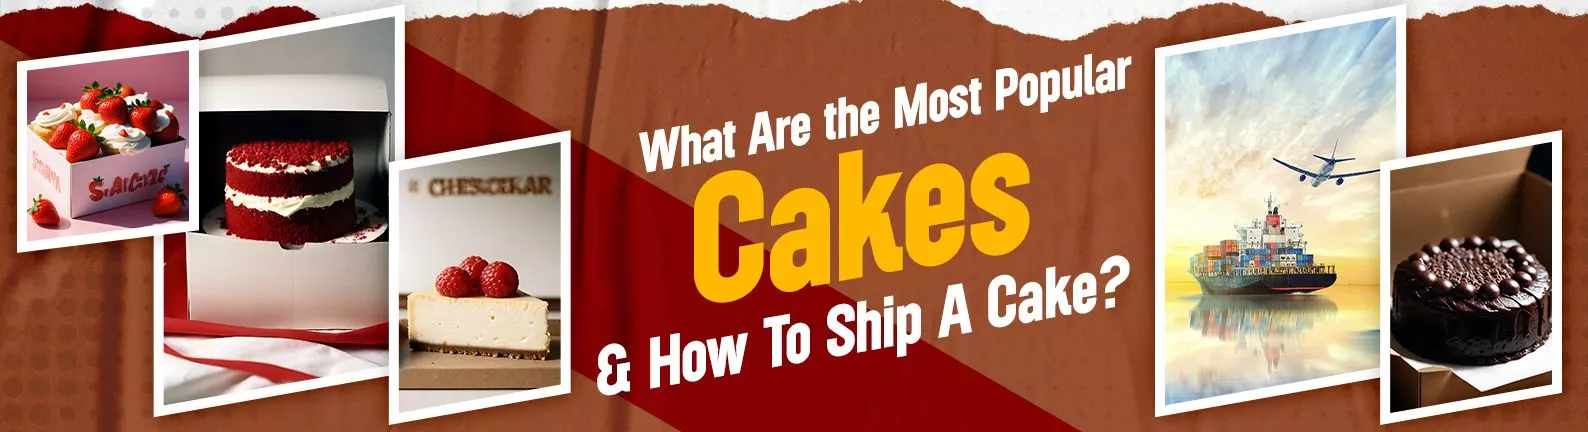 What-Are-the-Most-Popular-Cakes--How-To-Ship-A-Cake